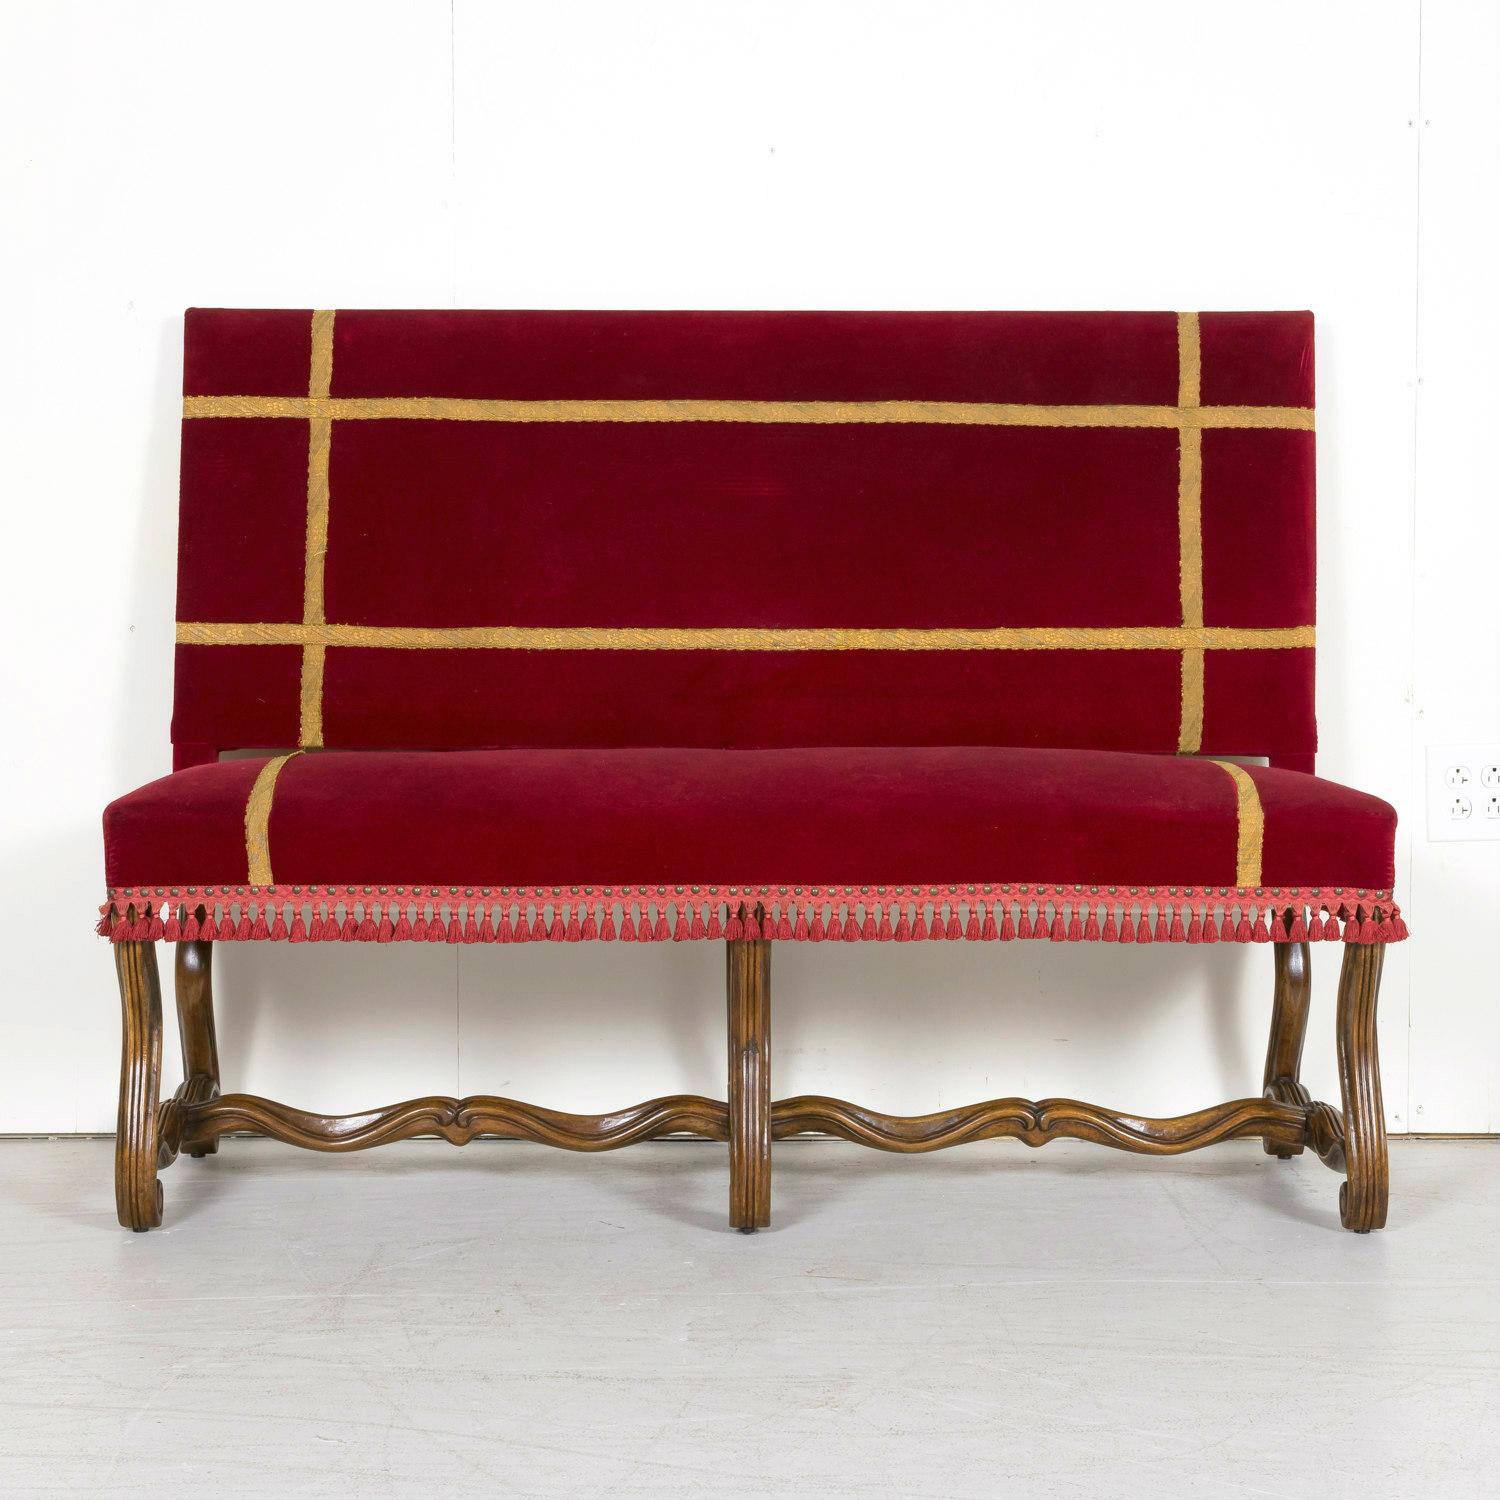 A 19th century Louis XIV style hand carved Spanish bench or banquette having original deep red velvet upholstery with metallic gold trim tape, brushed fringe, and nailhead trim, circa 1890s. This beautiful Spanish bench from the Catalan region is